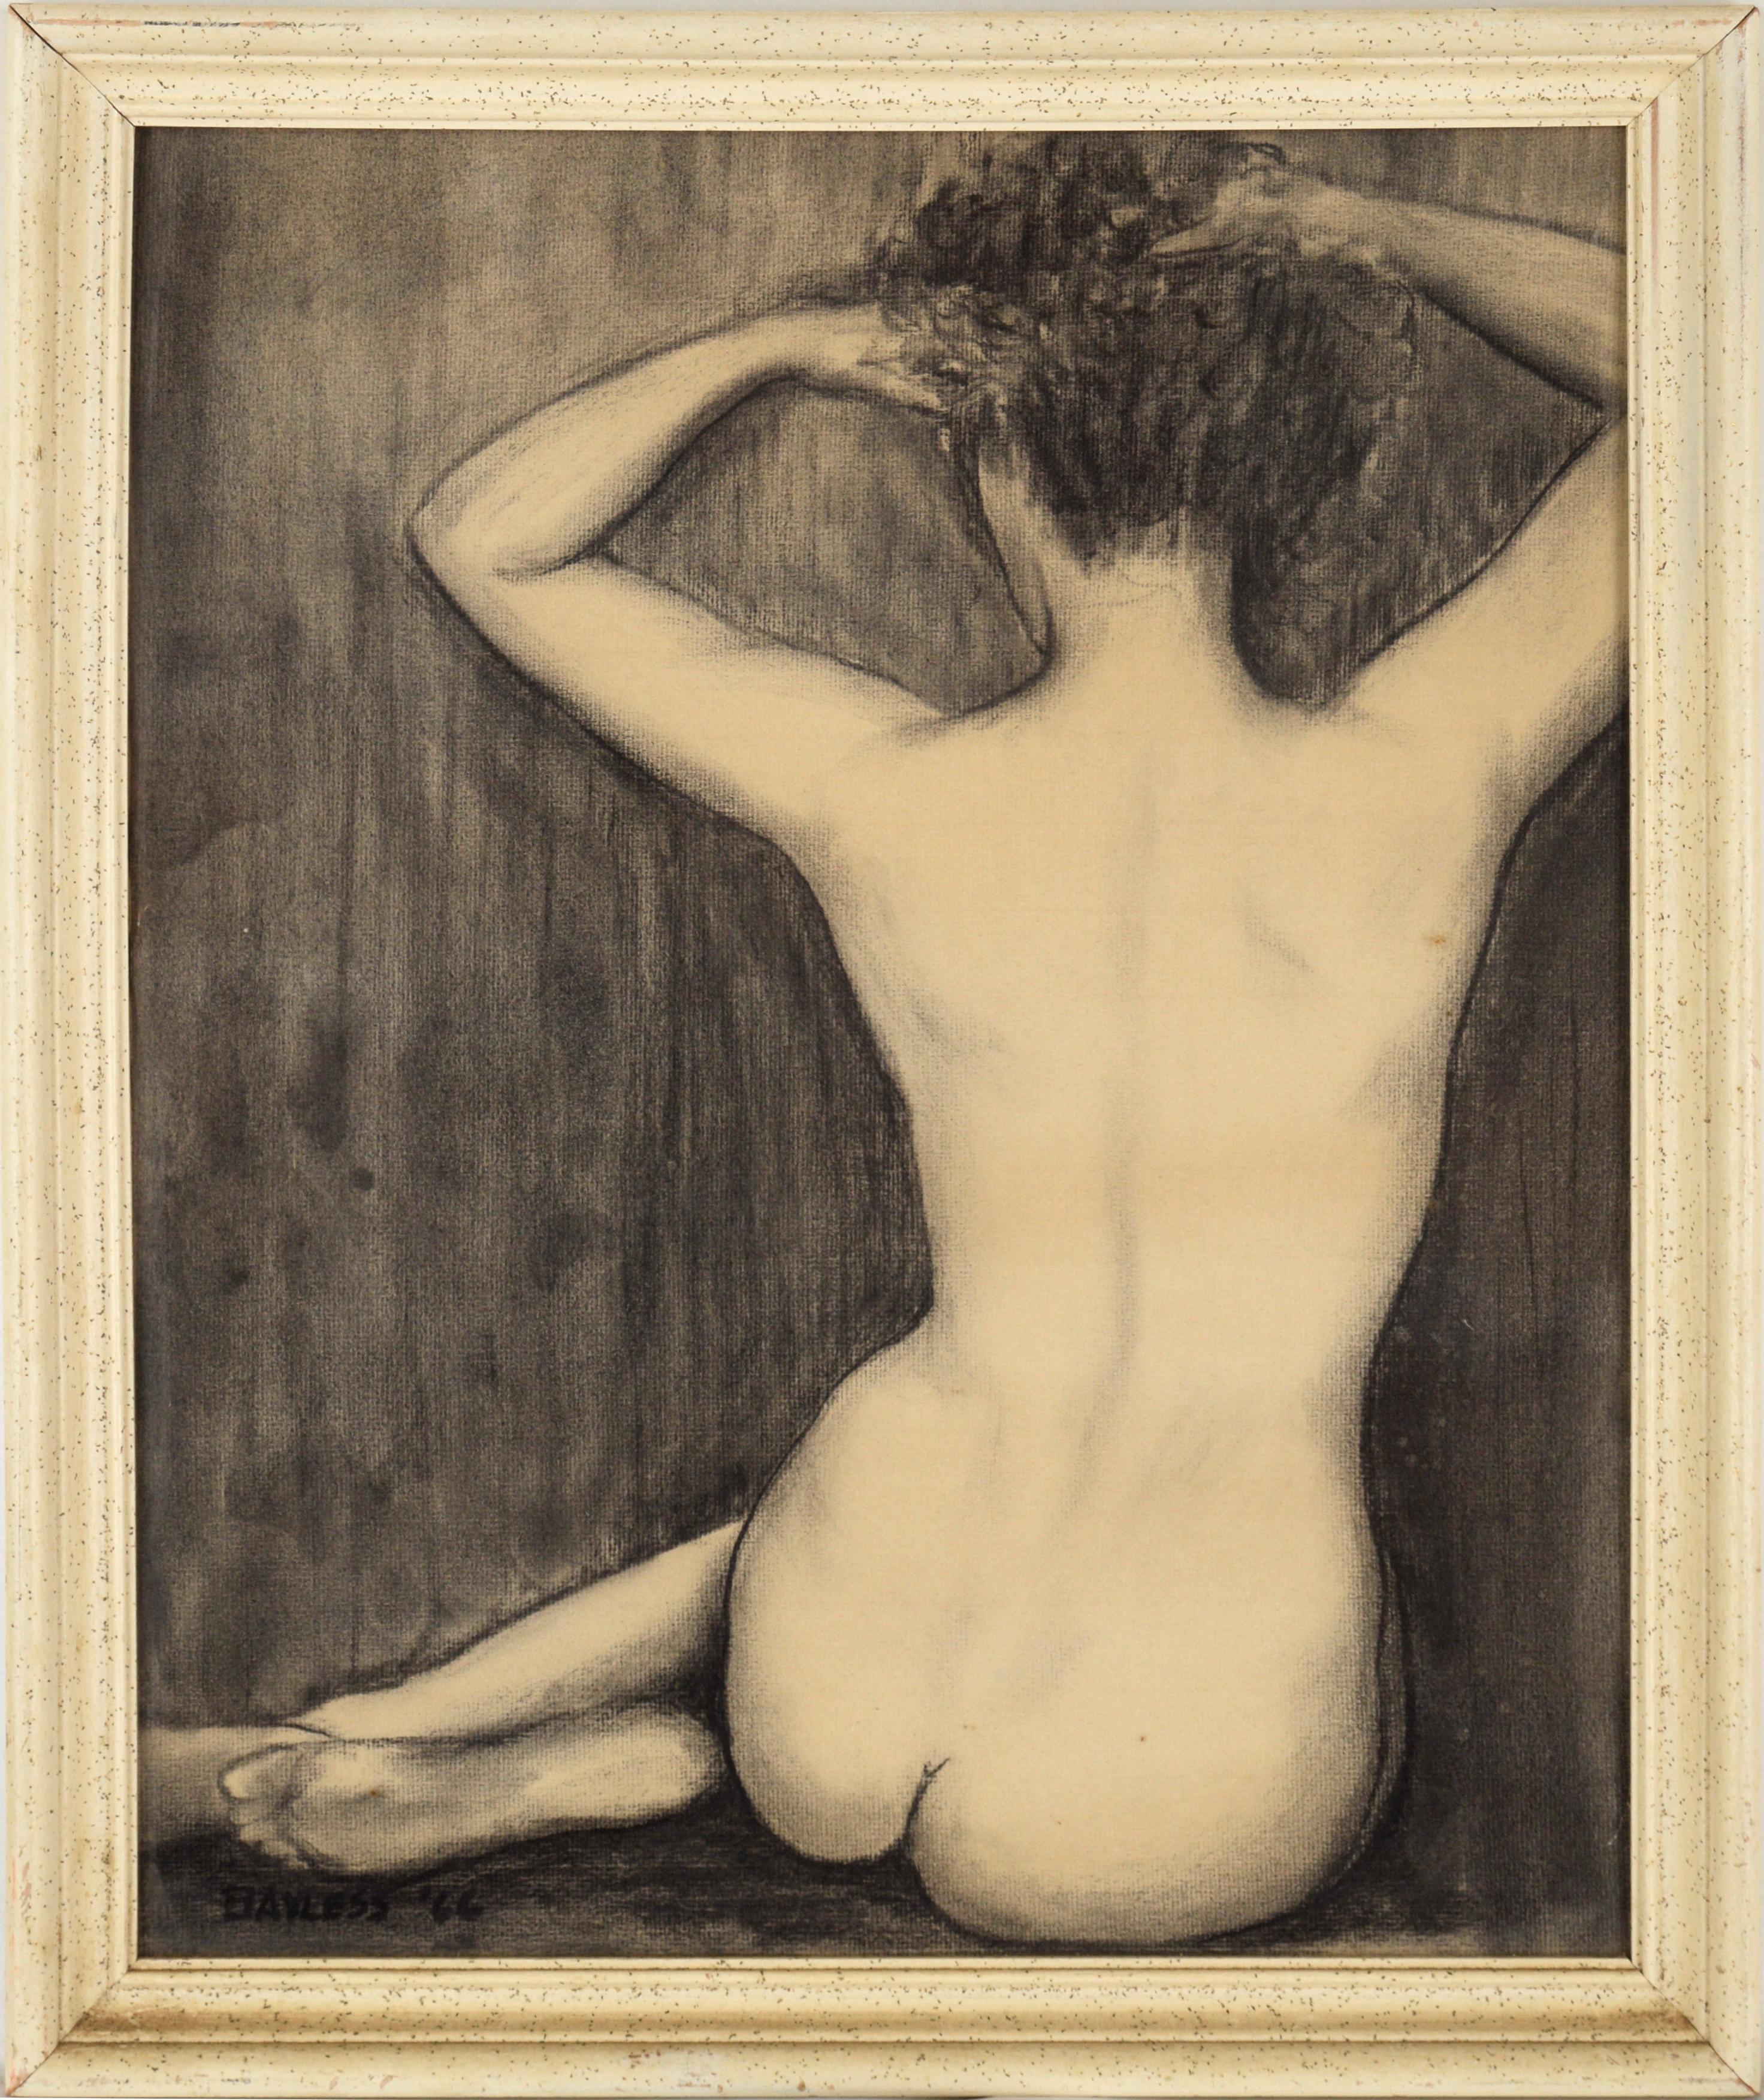 Nude Woman from the Back - Art by Bayless